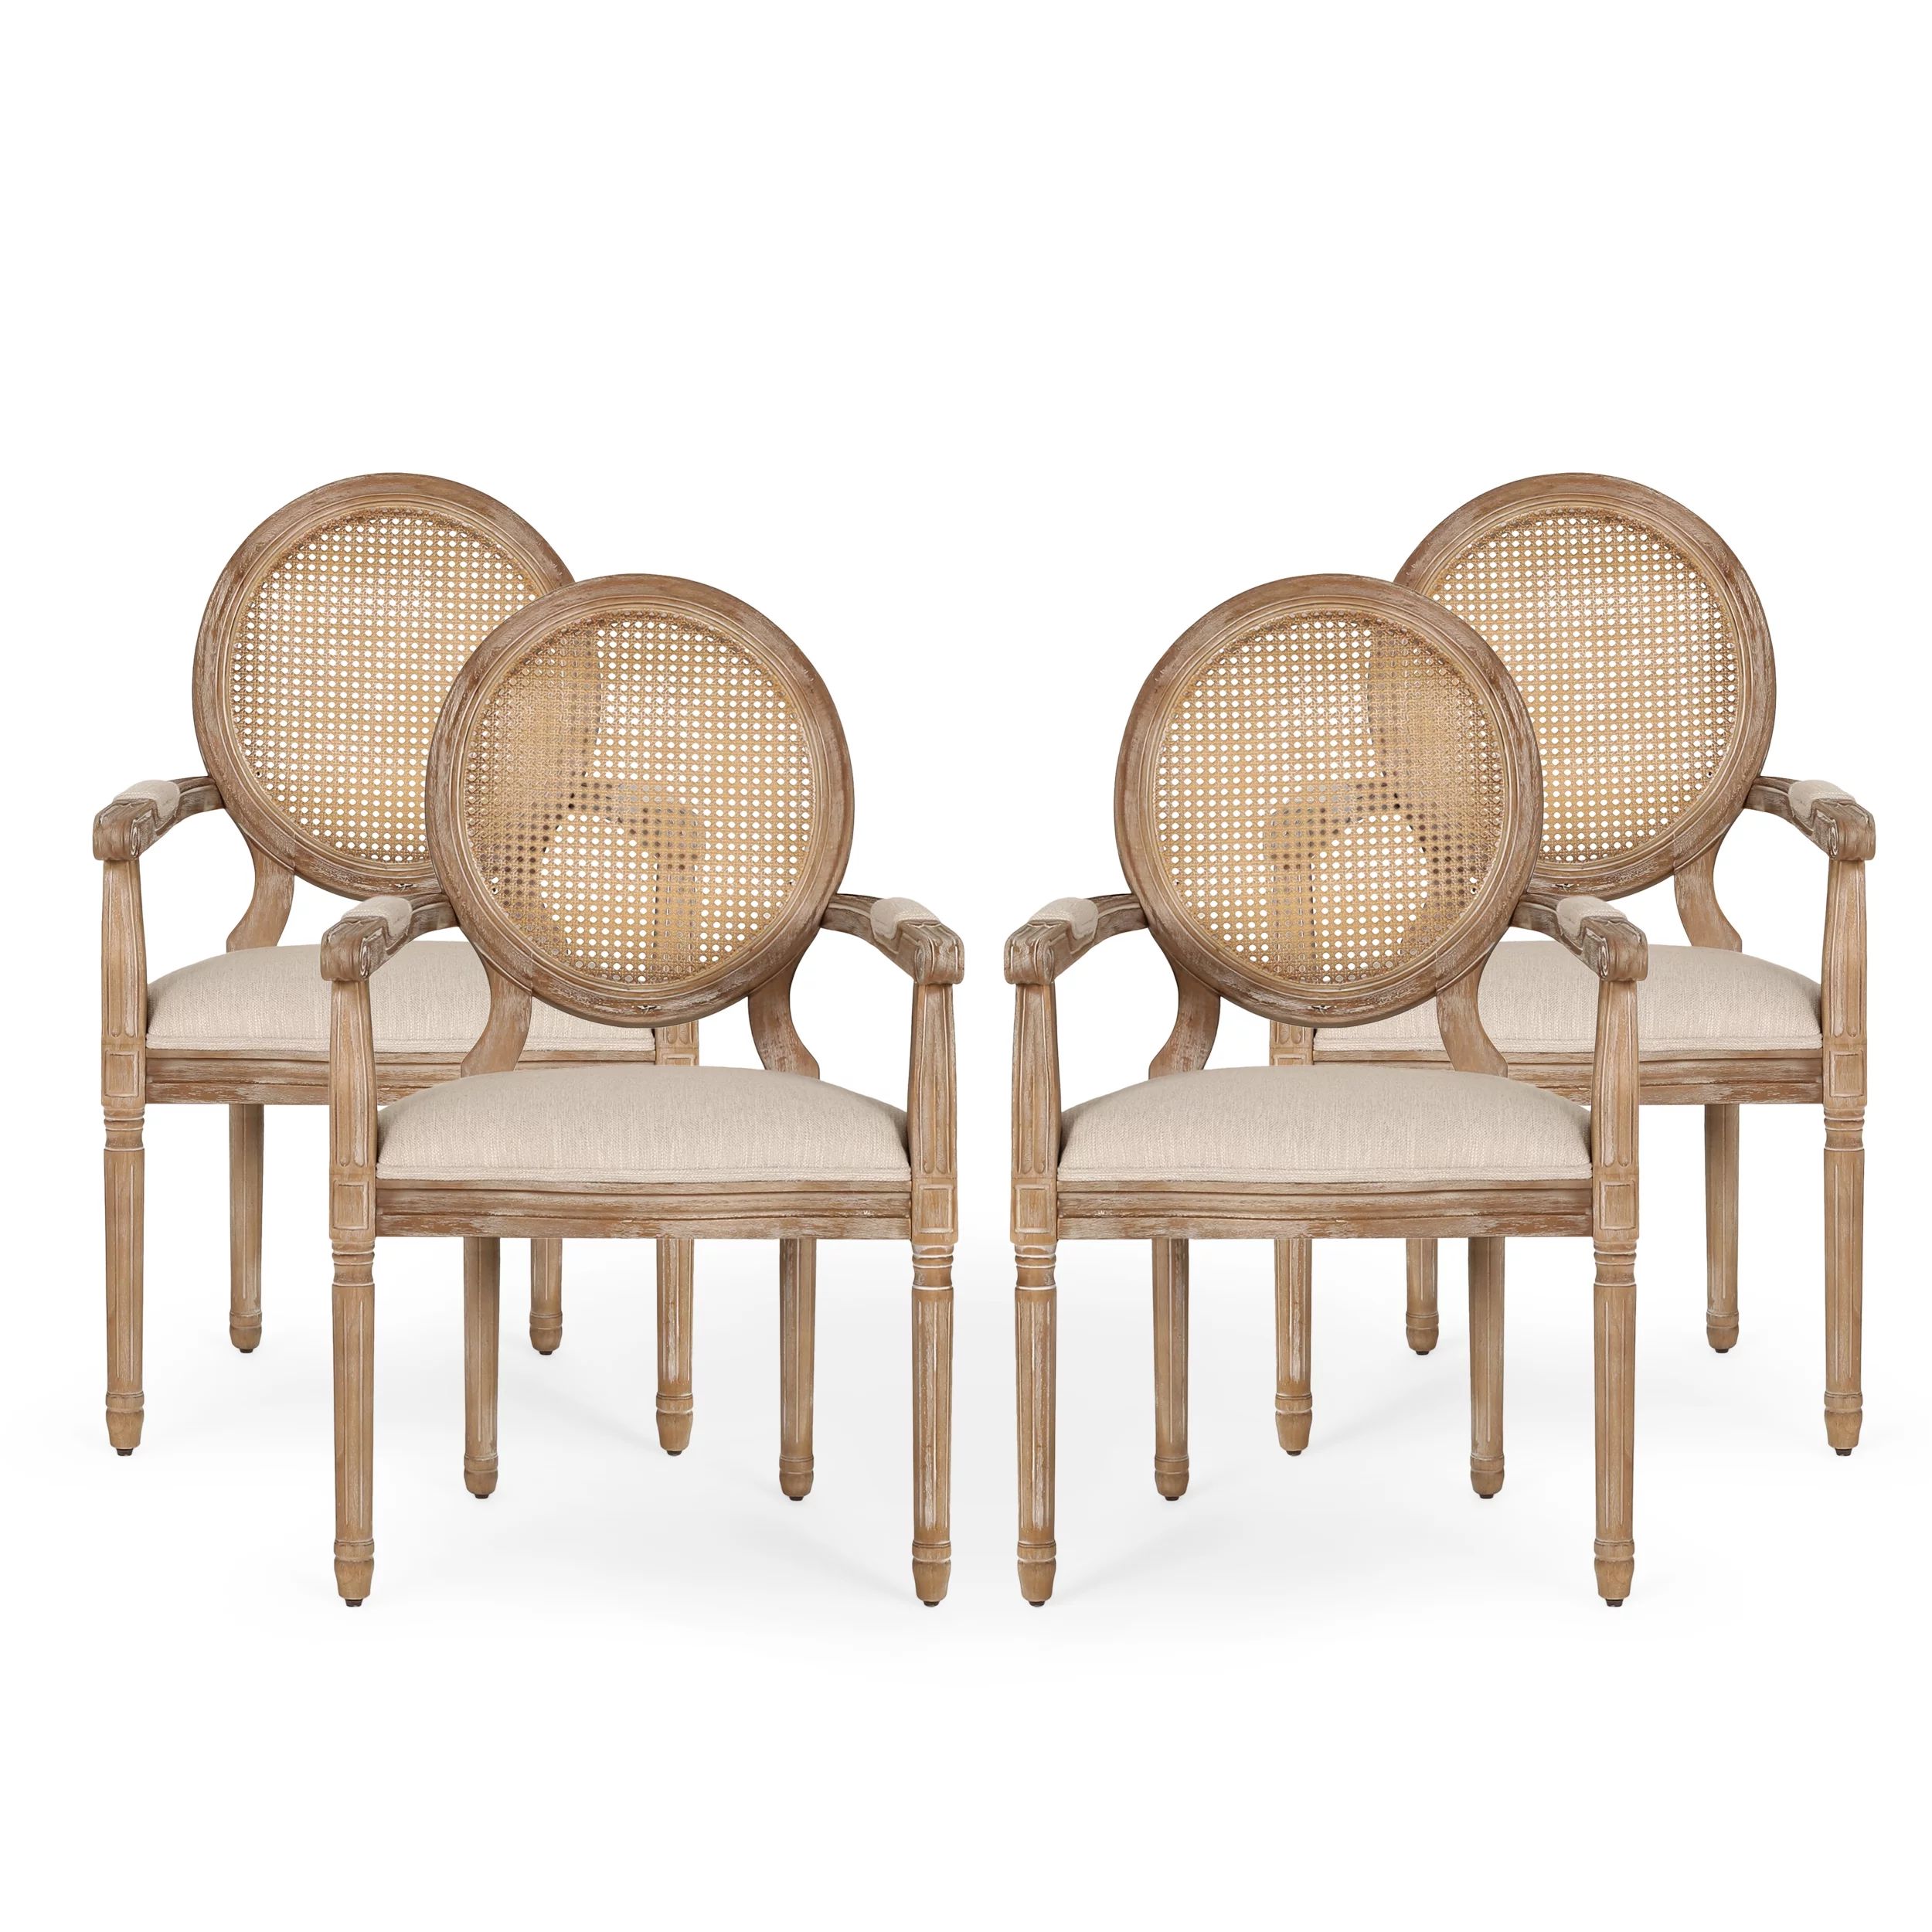 Aisenbrey French Country Wood and Cane Upholstered Dining Chair, Set of 4, Beige and Natural | Walmart (US)